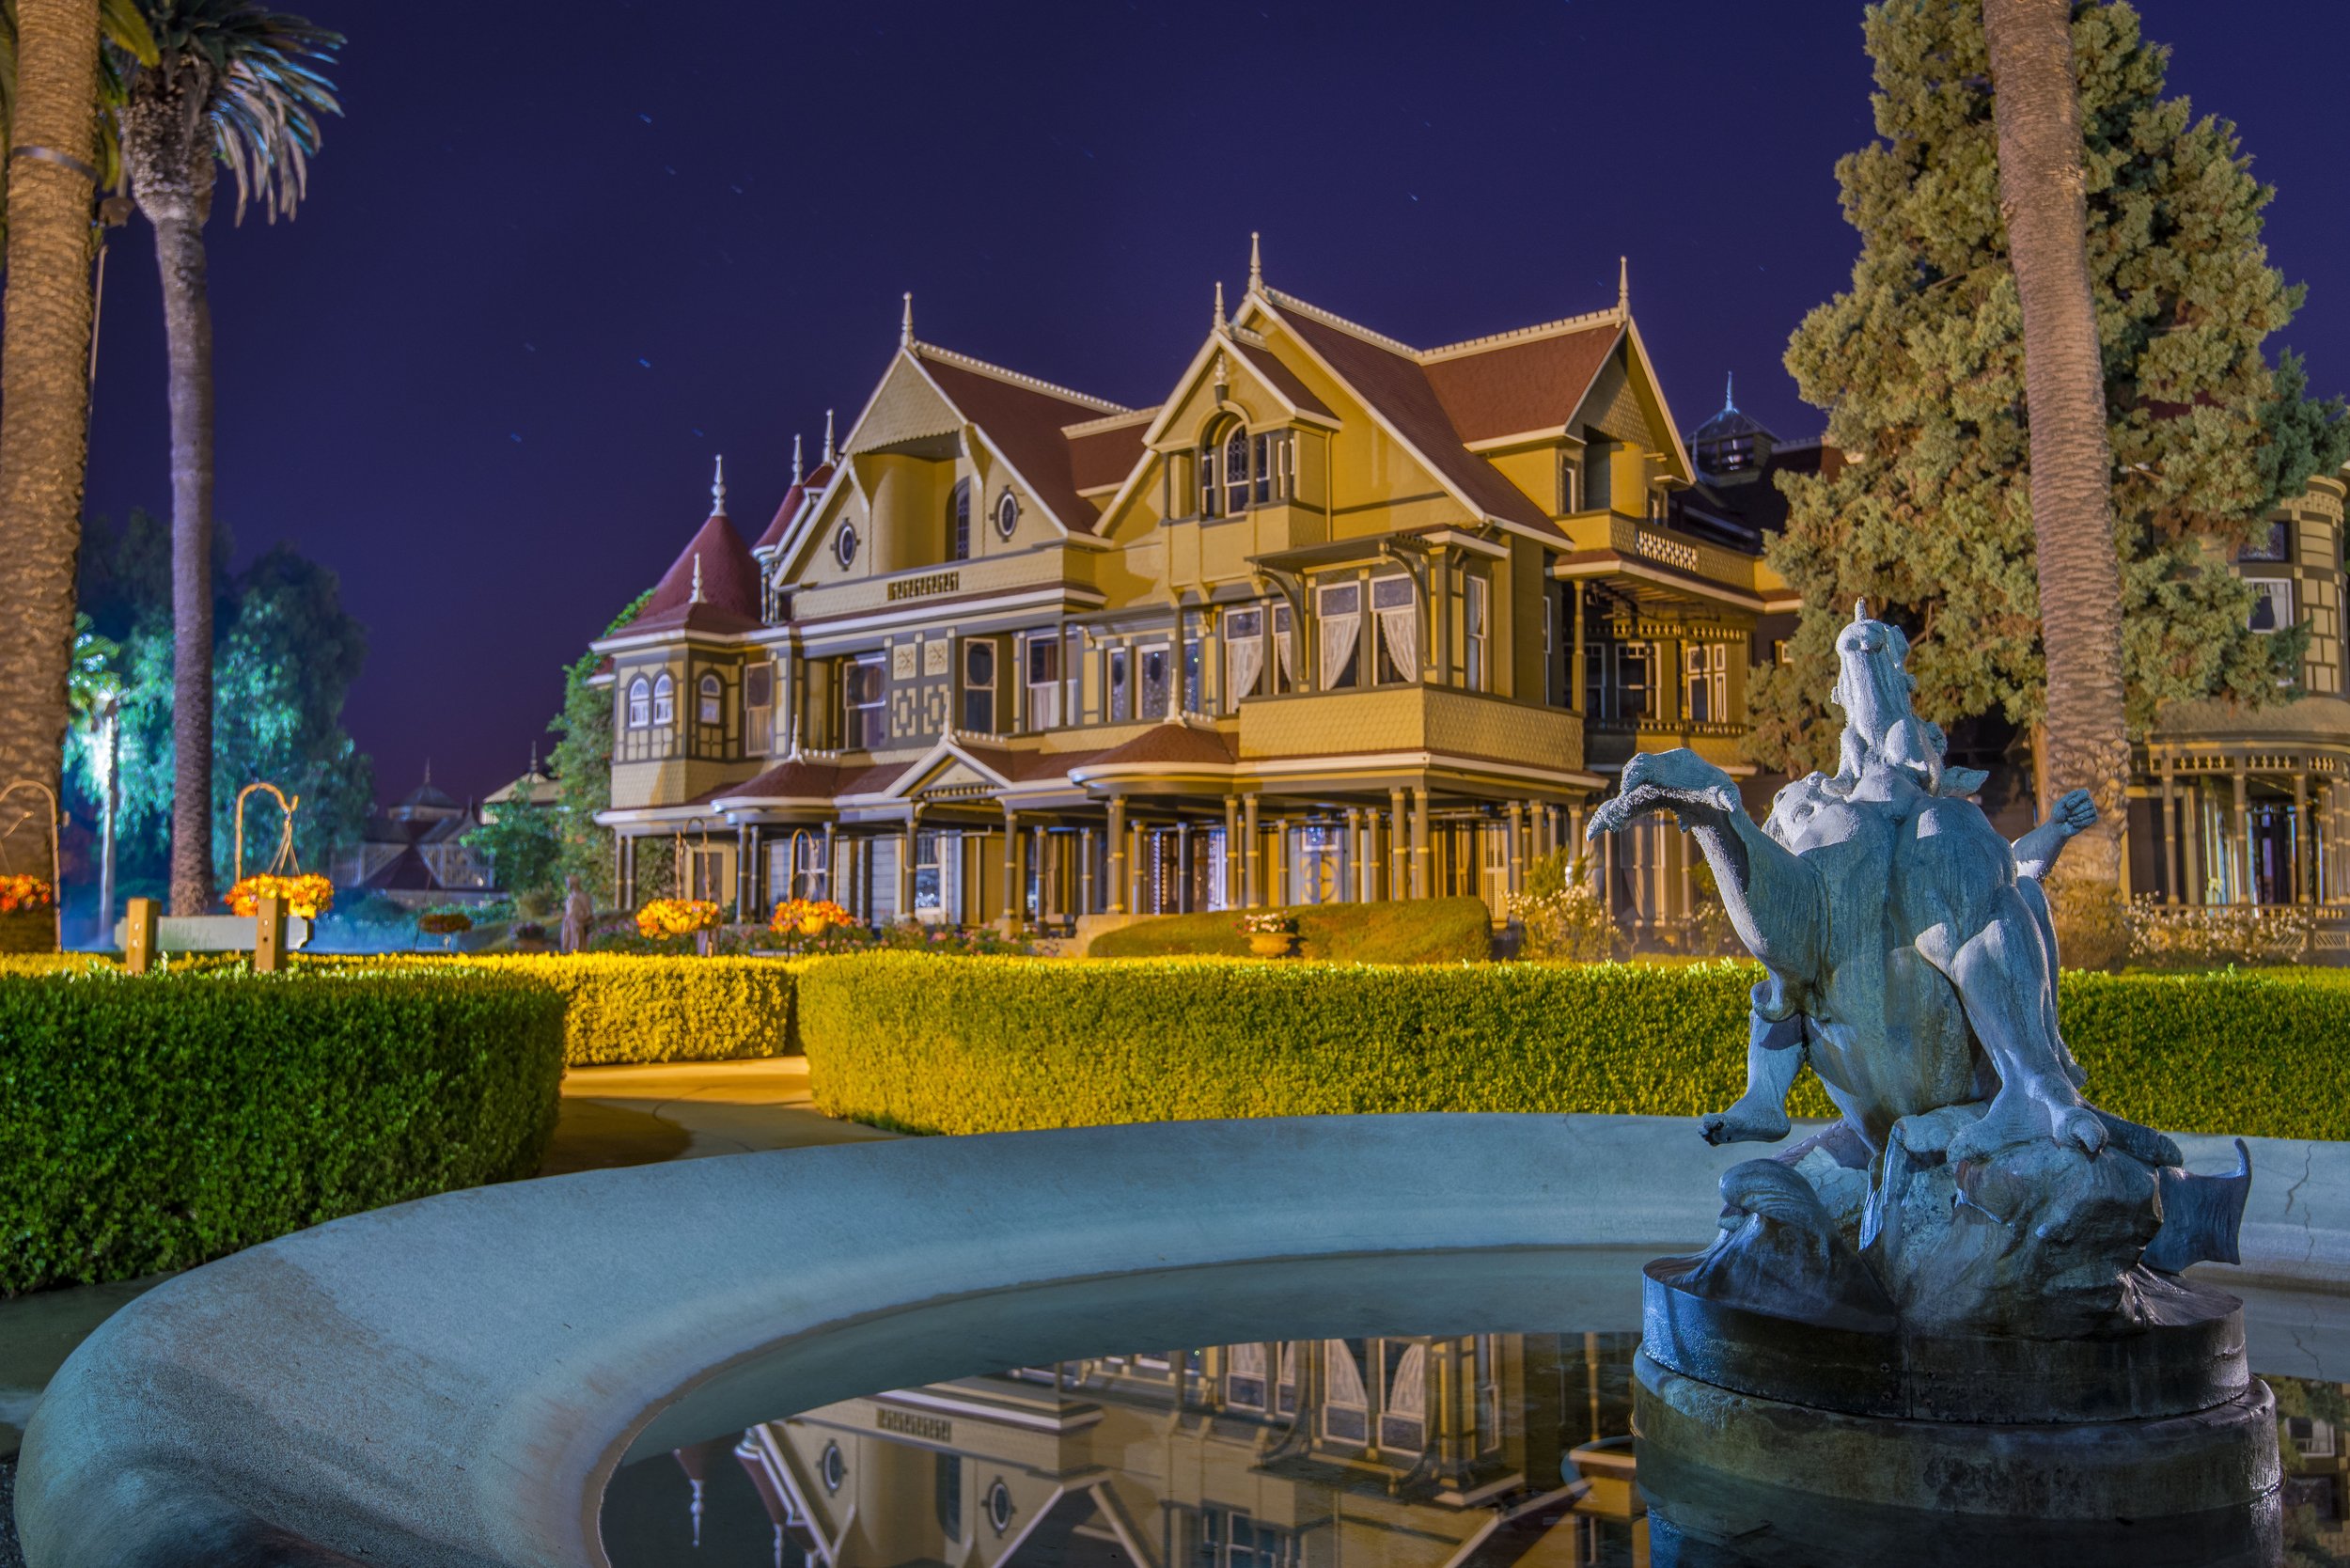 Visit the South Bay Haunted House That Inspired Walt Disney and Stephen King